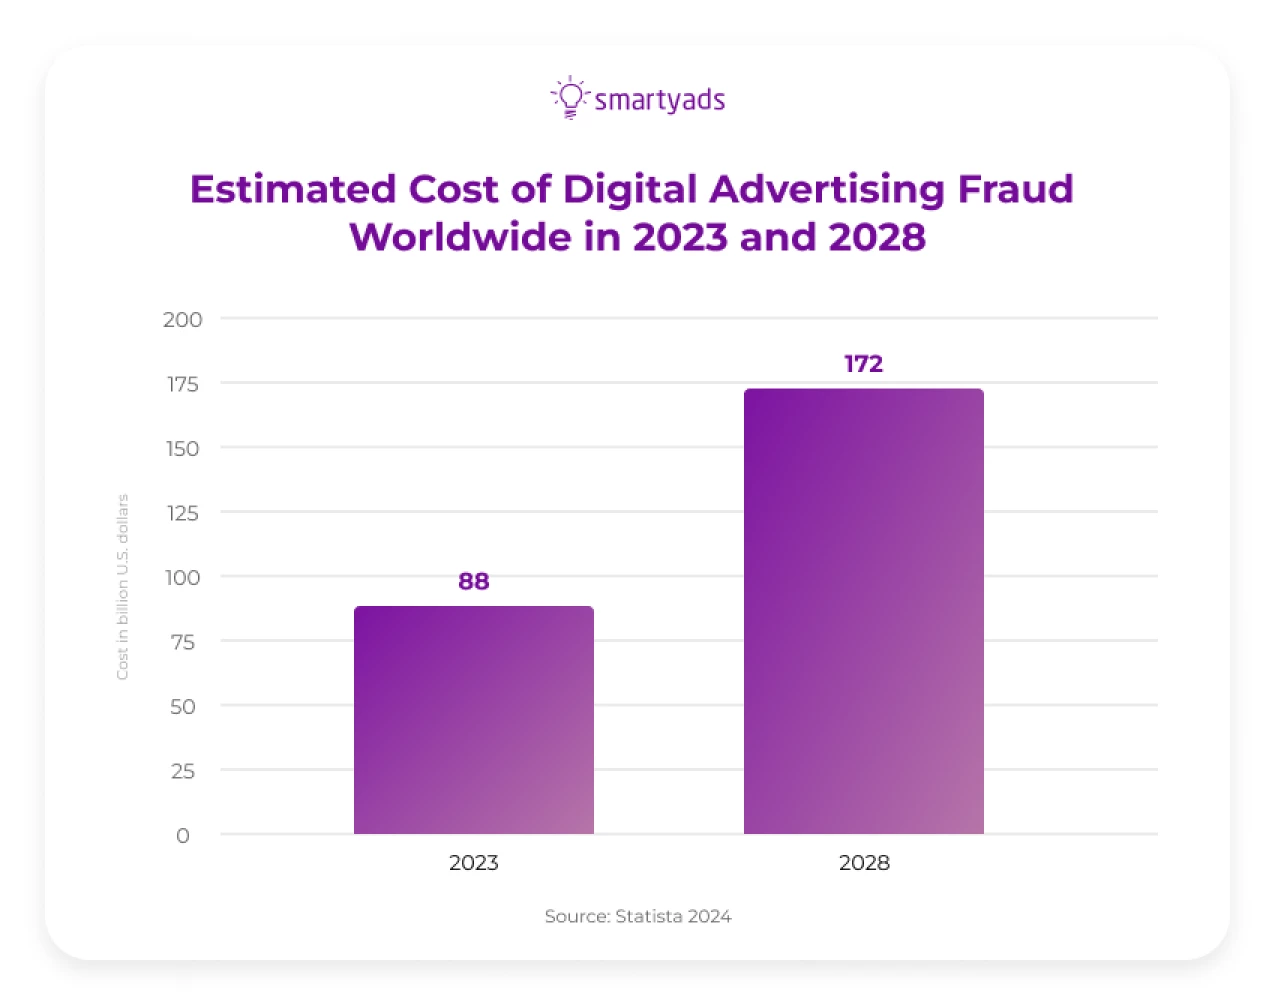 Estimated cost of digital advertising fraud worldwide in 2023 and 2028